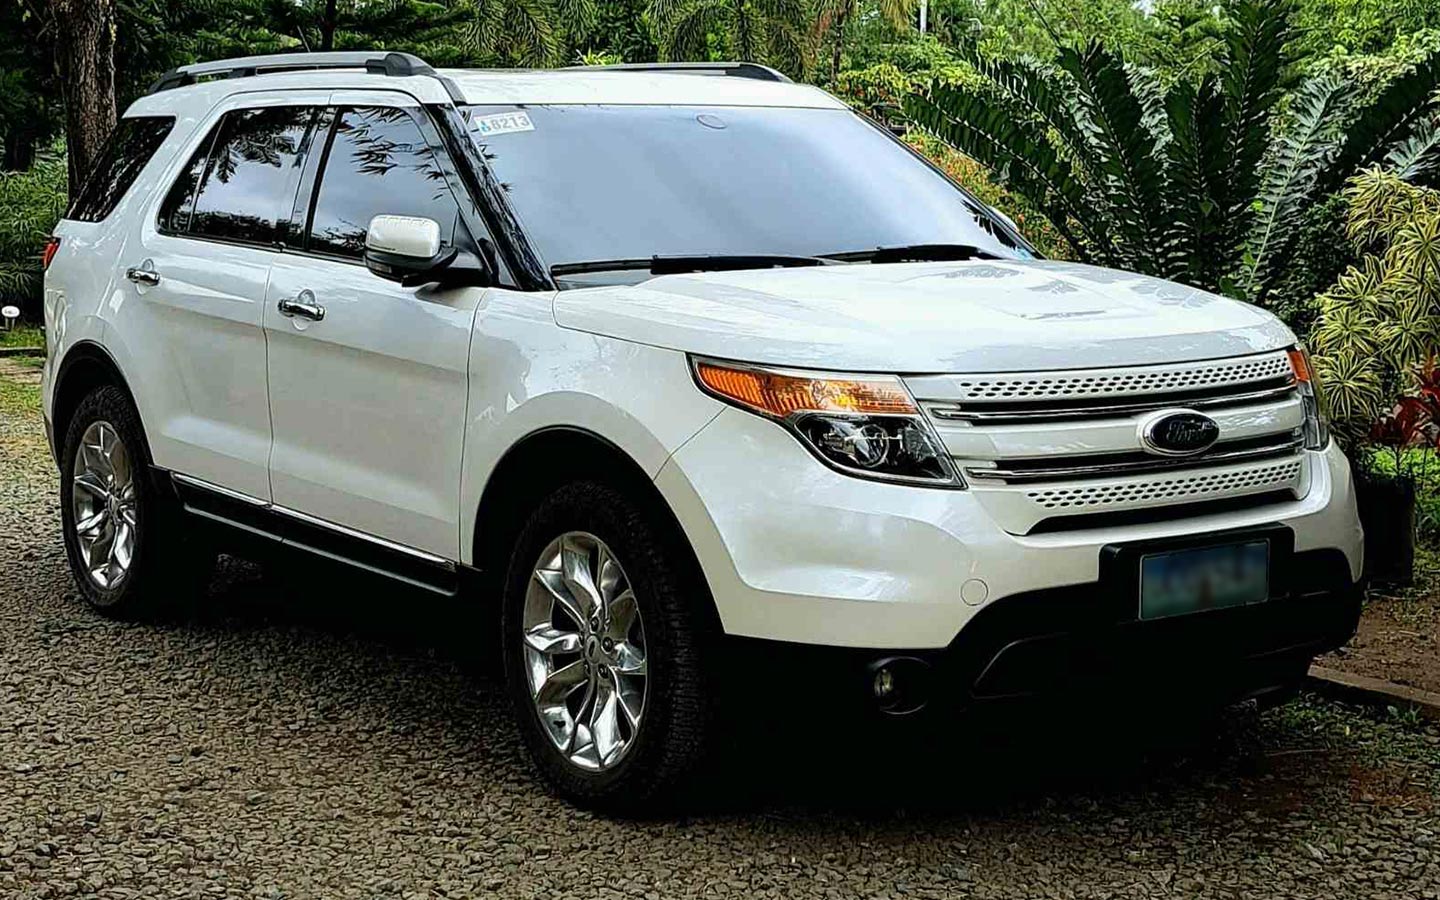 fifth-generation Ford Explorer